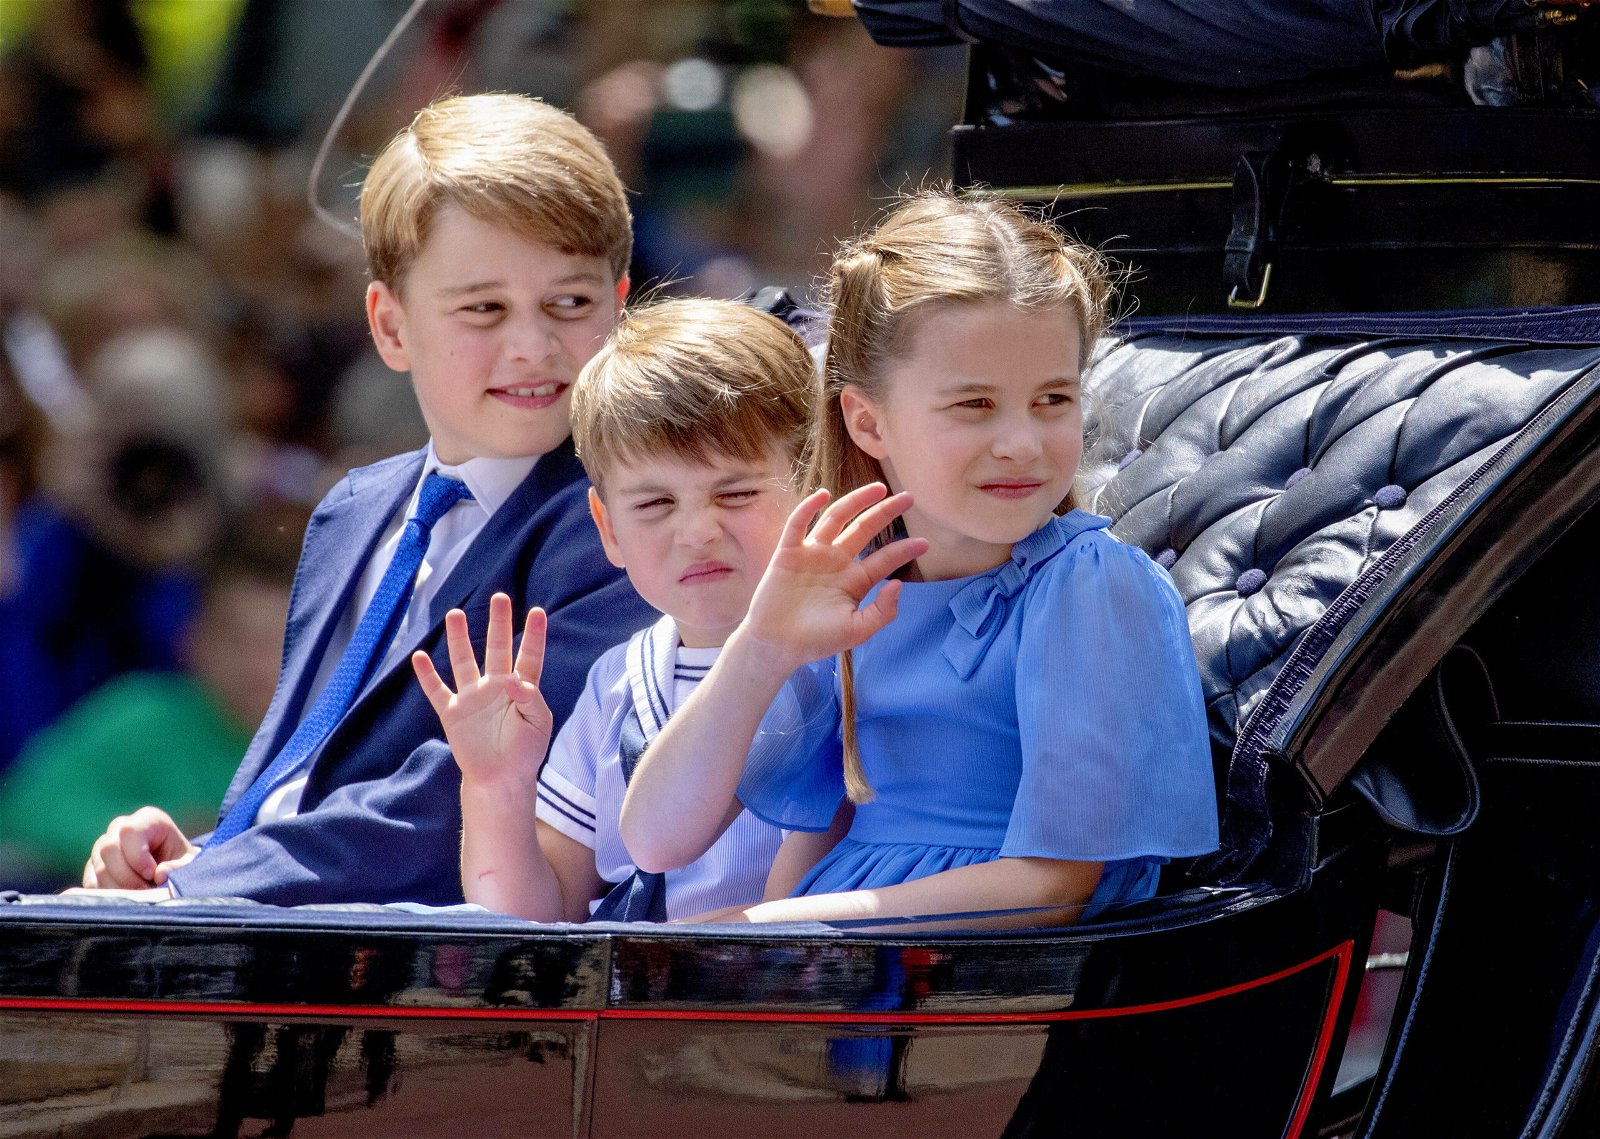 Wales Children Led by Prince George Set to Take Up New Roles for Coronation With No Whereabouts of the Sussex Kids